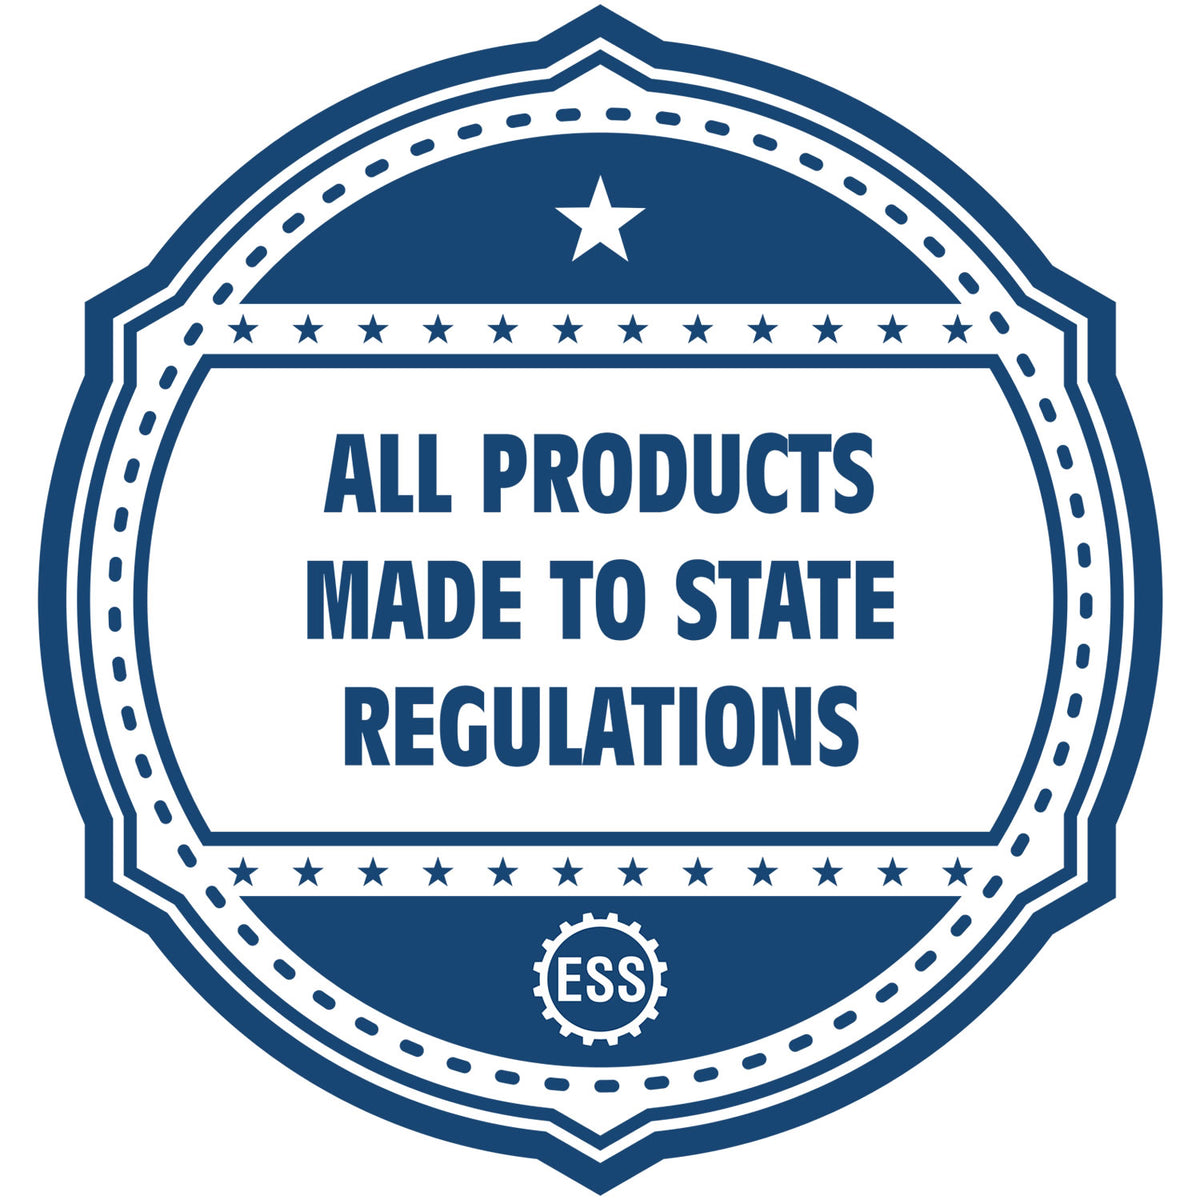 An icon or badge element for the Wooden Handle Wyoming Rectangular Notary Public Stamp showing that this product is made in compliance with state regulations.